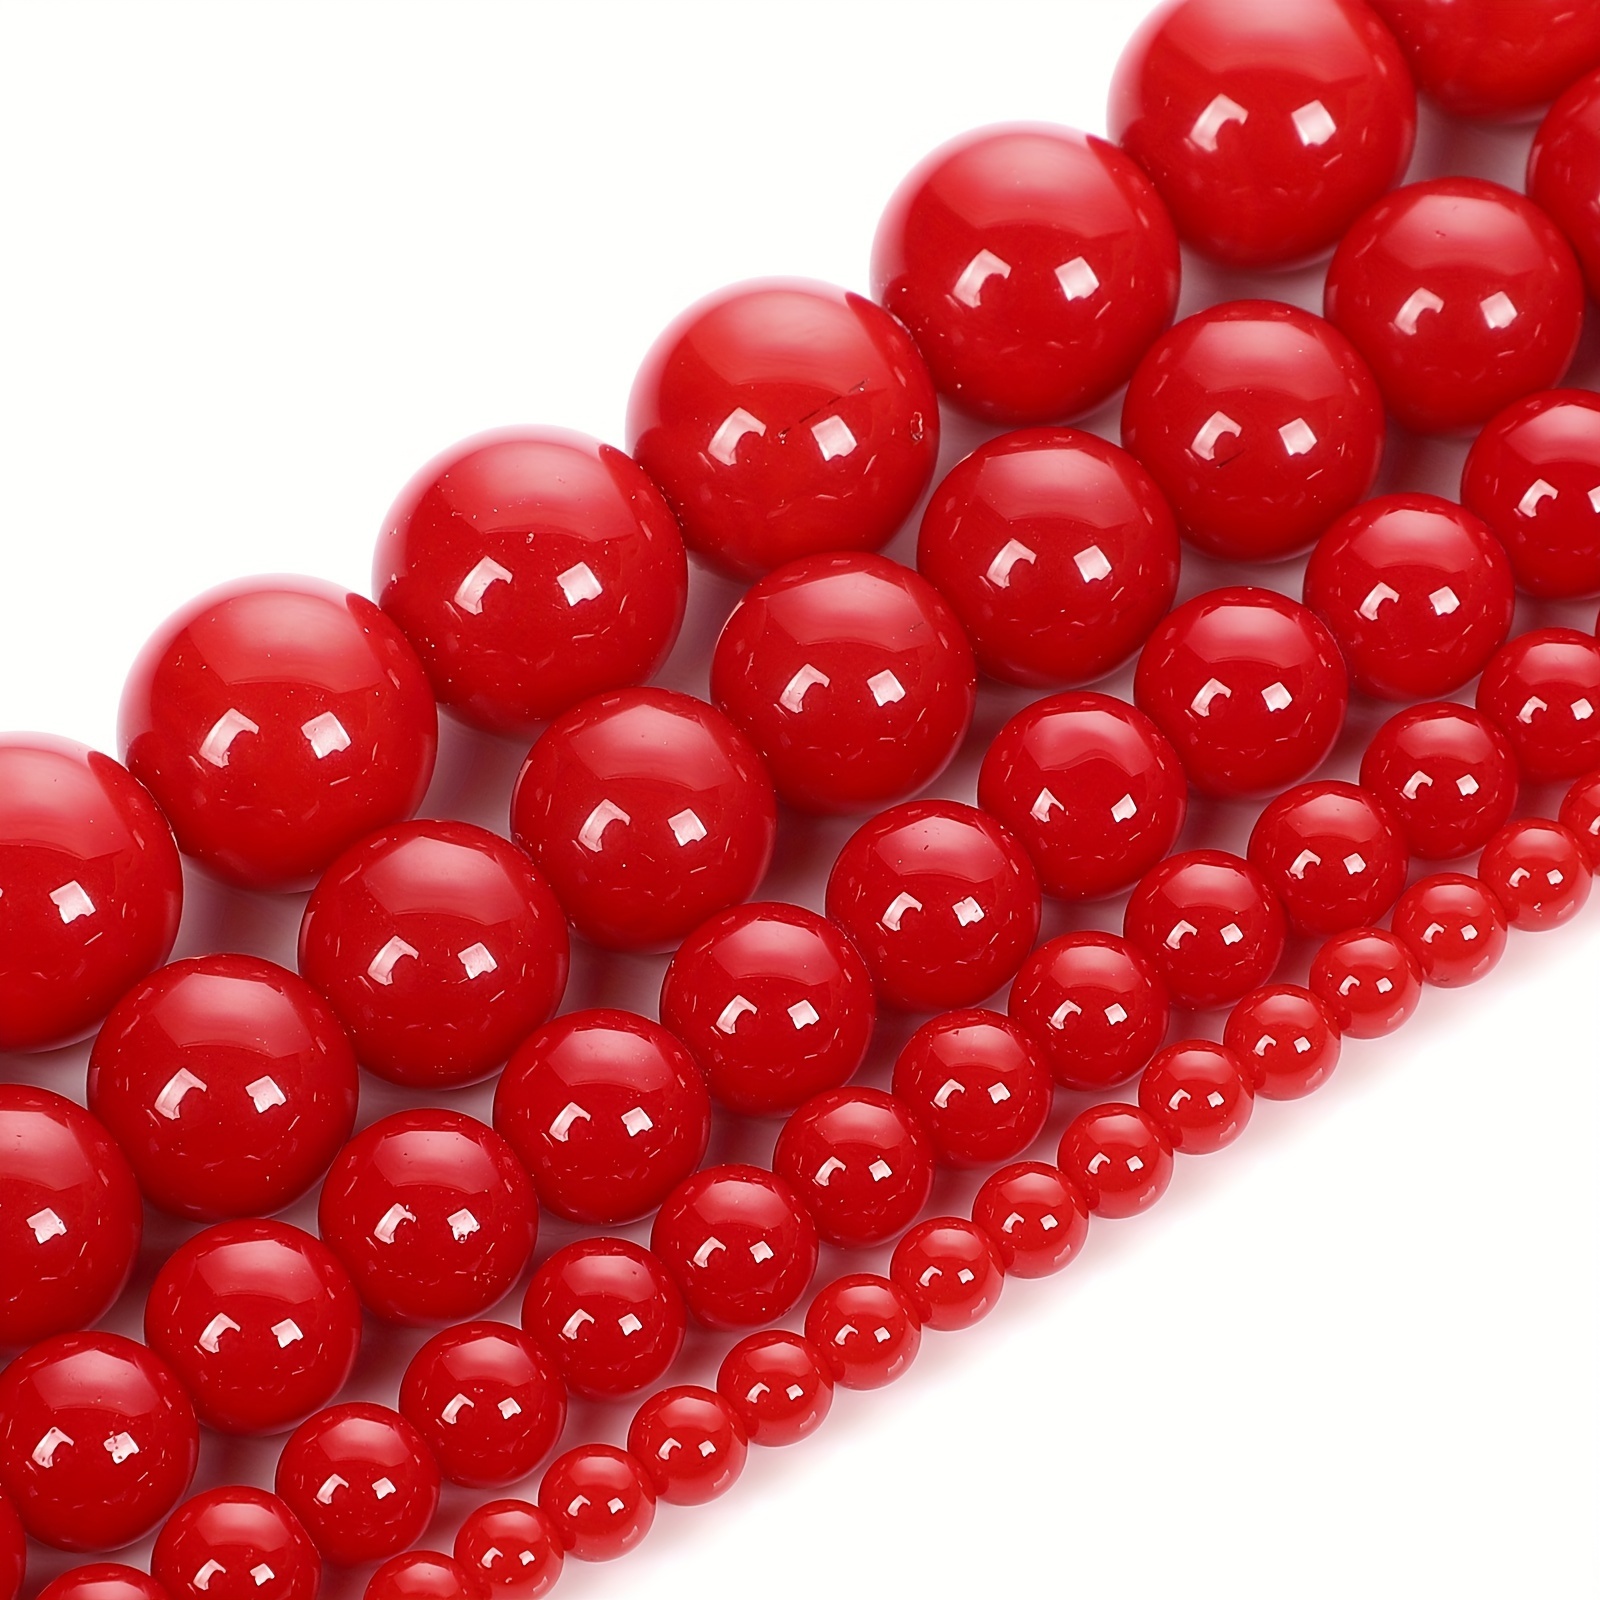 Natural Stone Red Coral Beads Round Loose Beads For Jewelry Making DIY  Bracelet Necklace 6 8 10 12mm 15